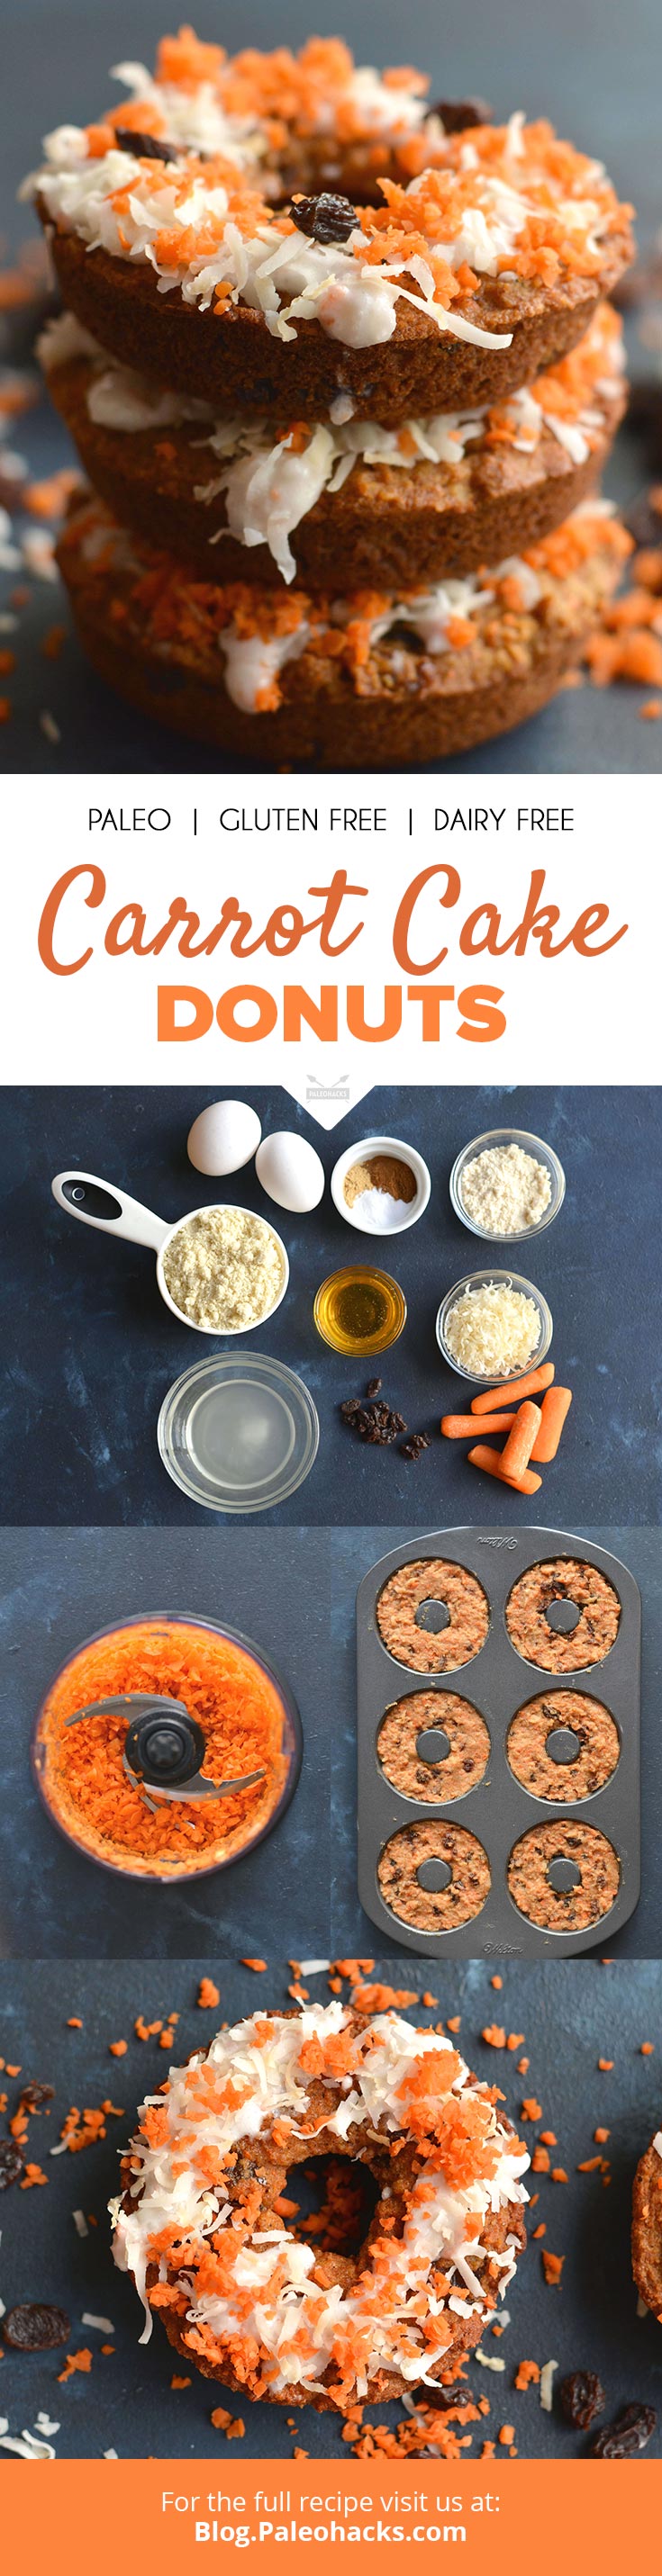 Got a donut craving? Bite into these Paleo Carrot Cake Donuts with a decadent coconut cream frosting! Grain-free, and full of protein and healthy fat.